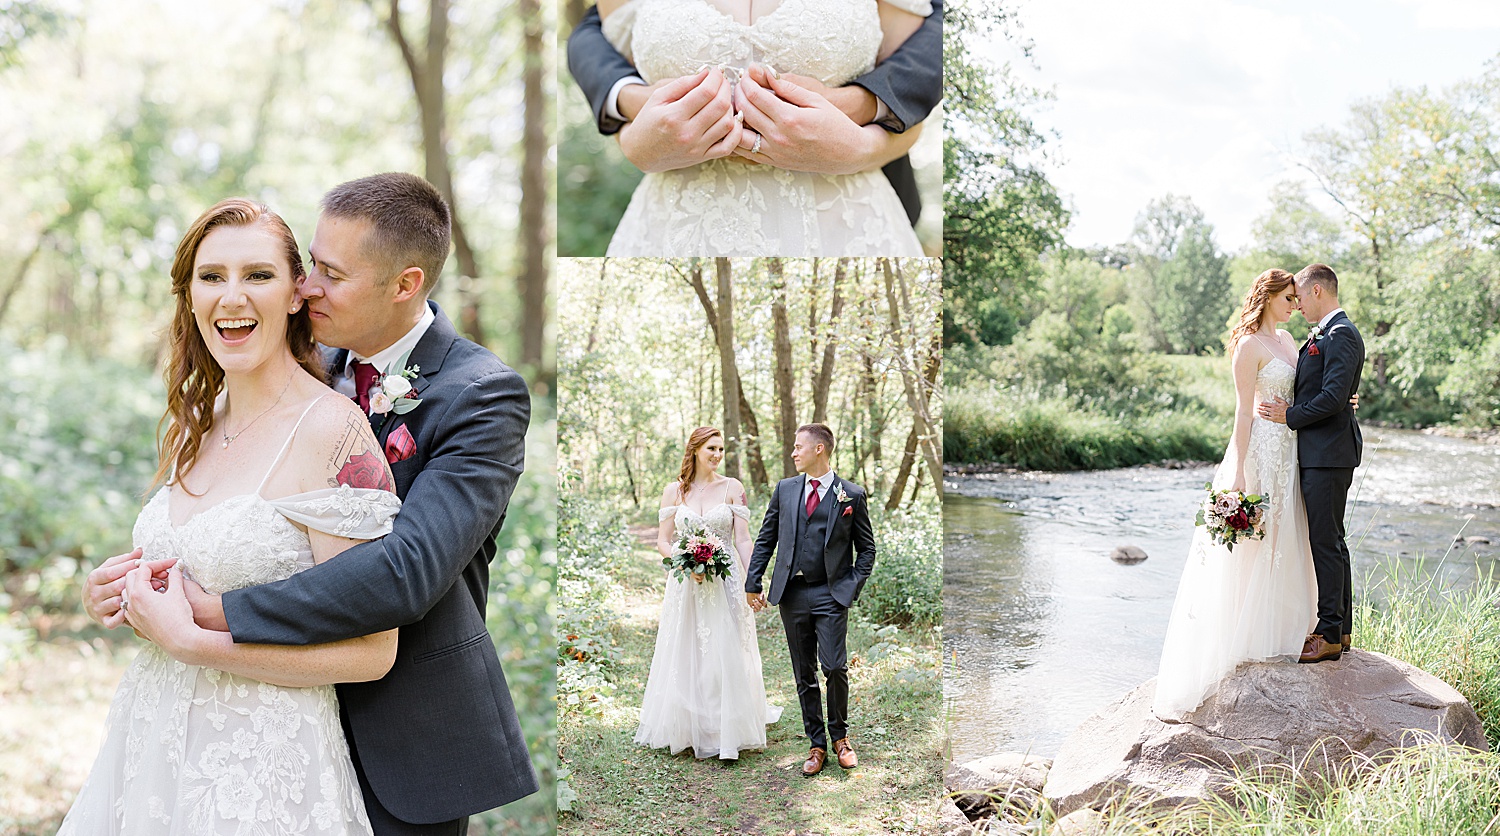 walking the river at buffalo river state park wedding day during bridal portraits 